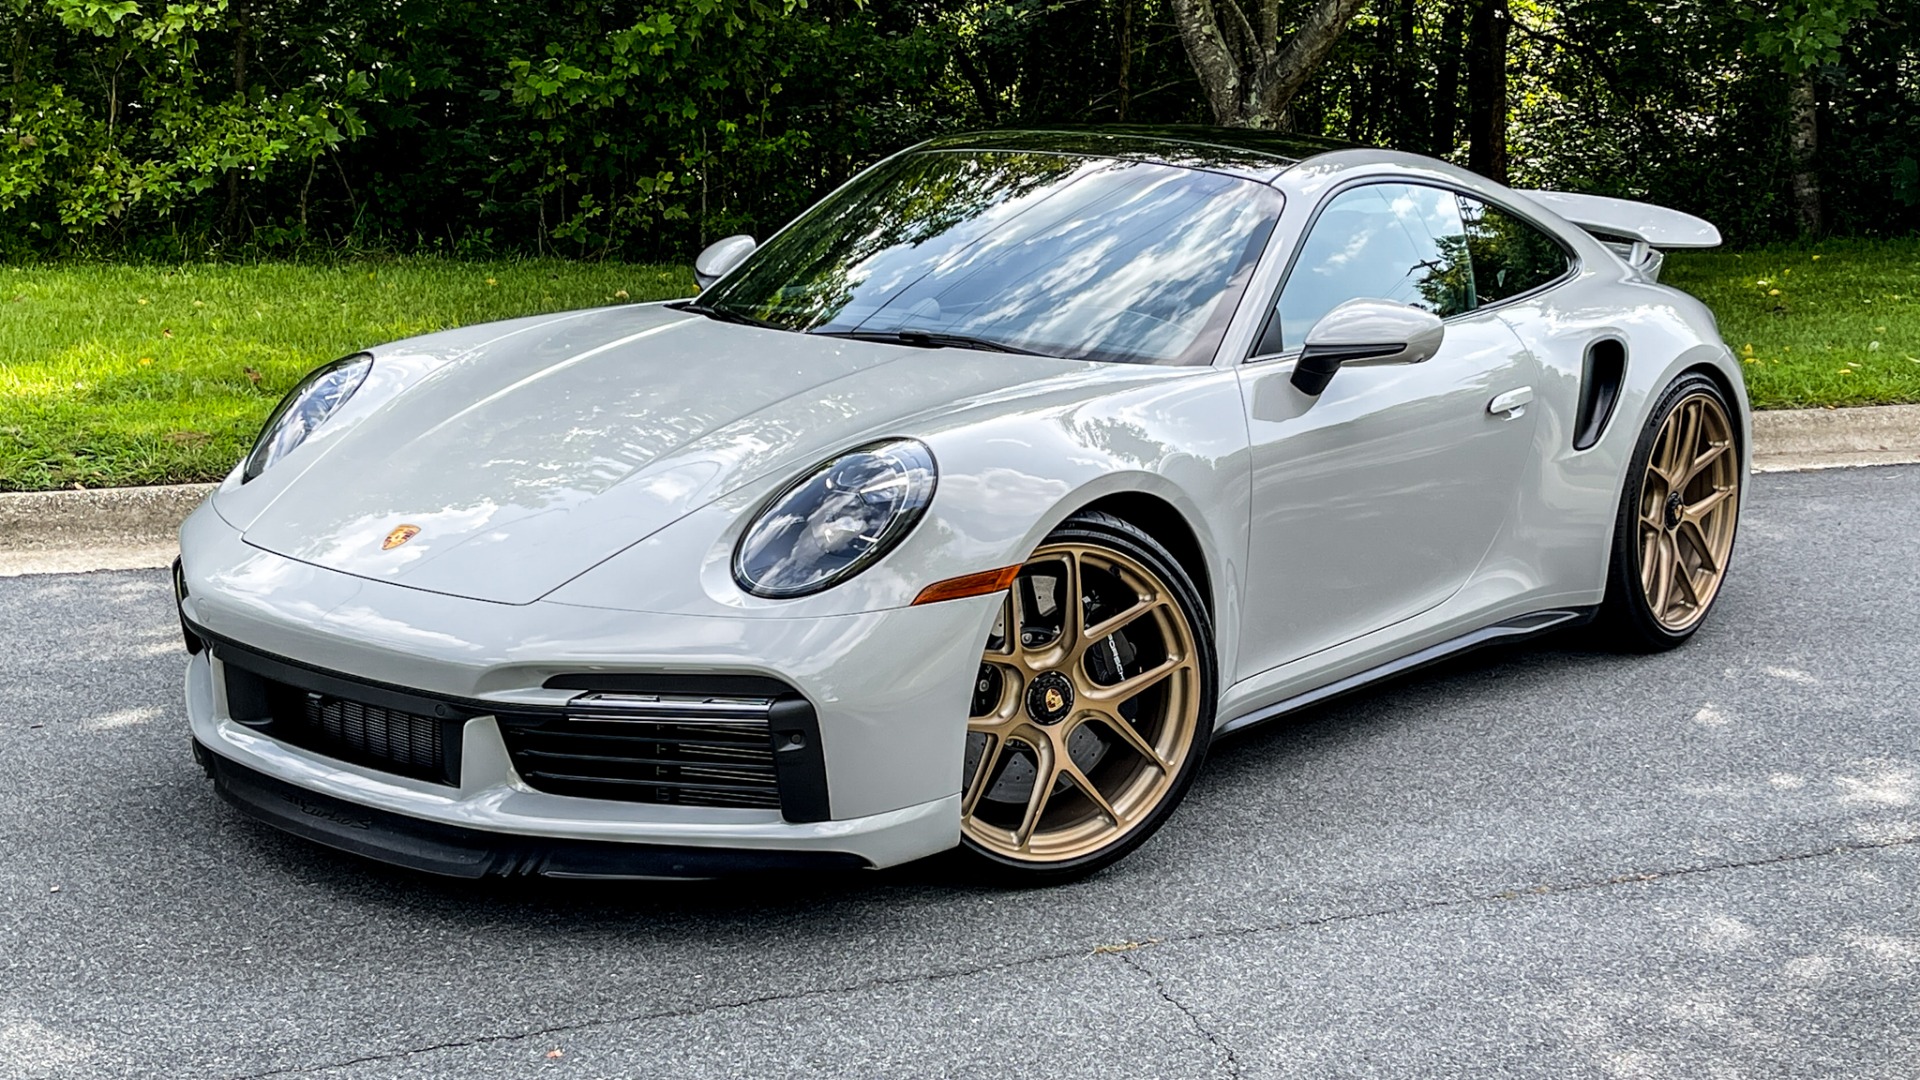 Used 2021 Porsche 911 Turbo S / HRE WHEELS / FRONT LIFT / MATRIX LIGHTS / PASM SUSPENSION for sale Sold at Formula Imports in Charlotte NC 28227 2